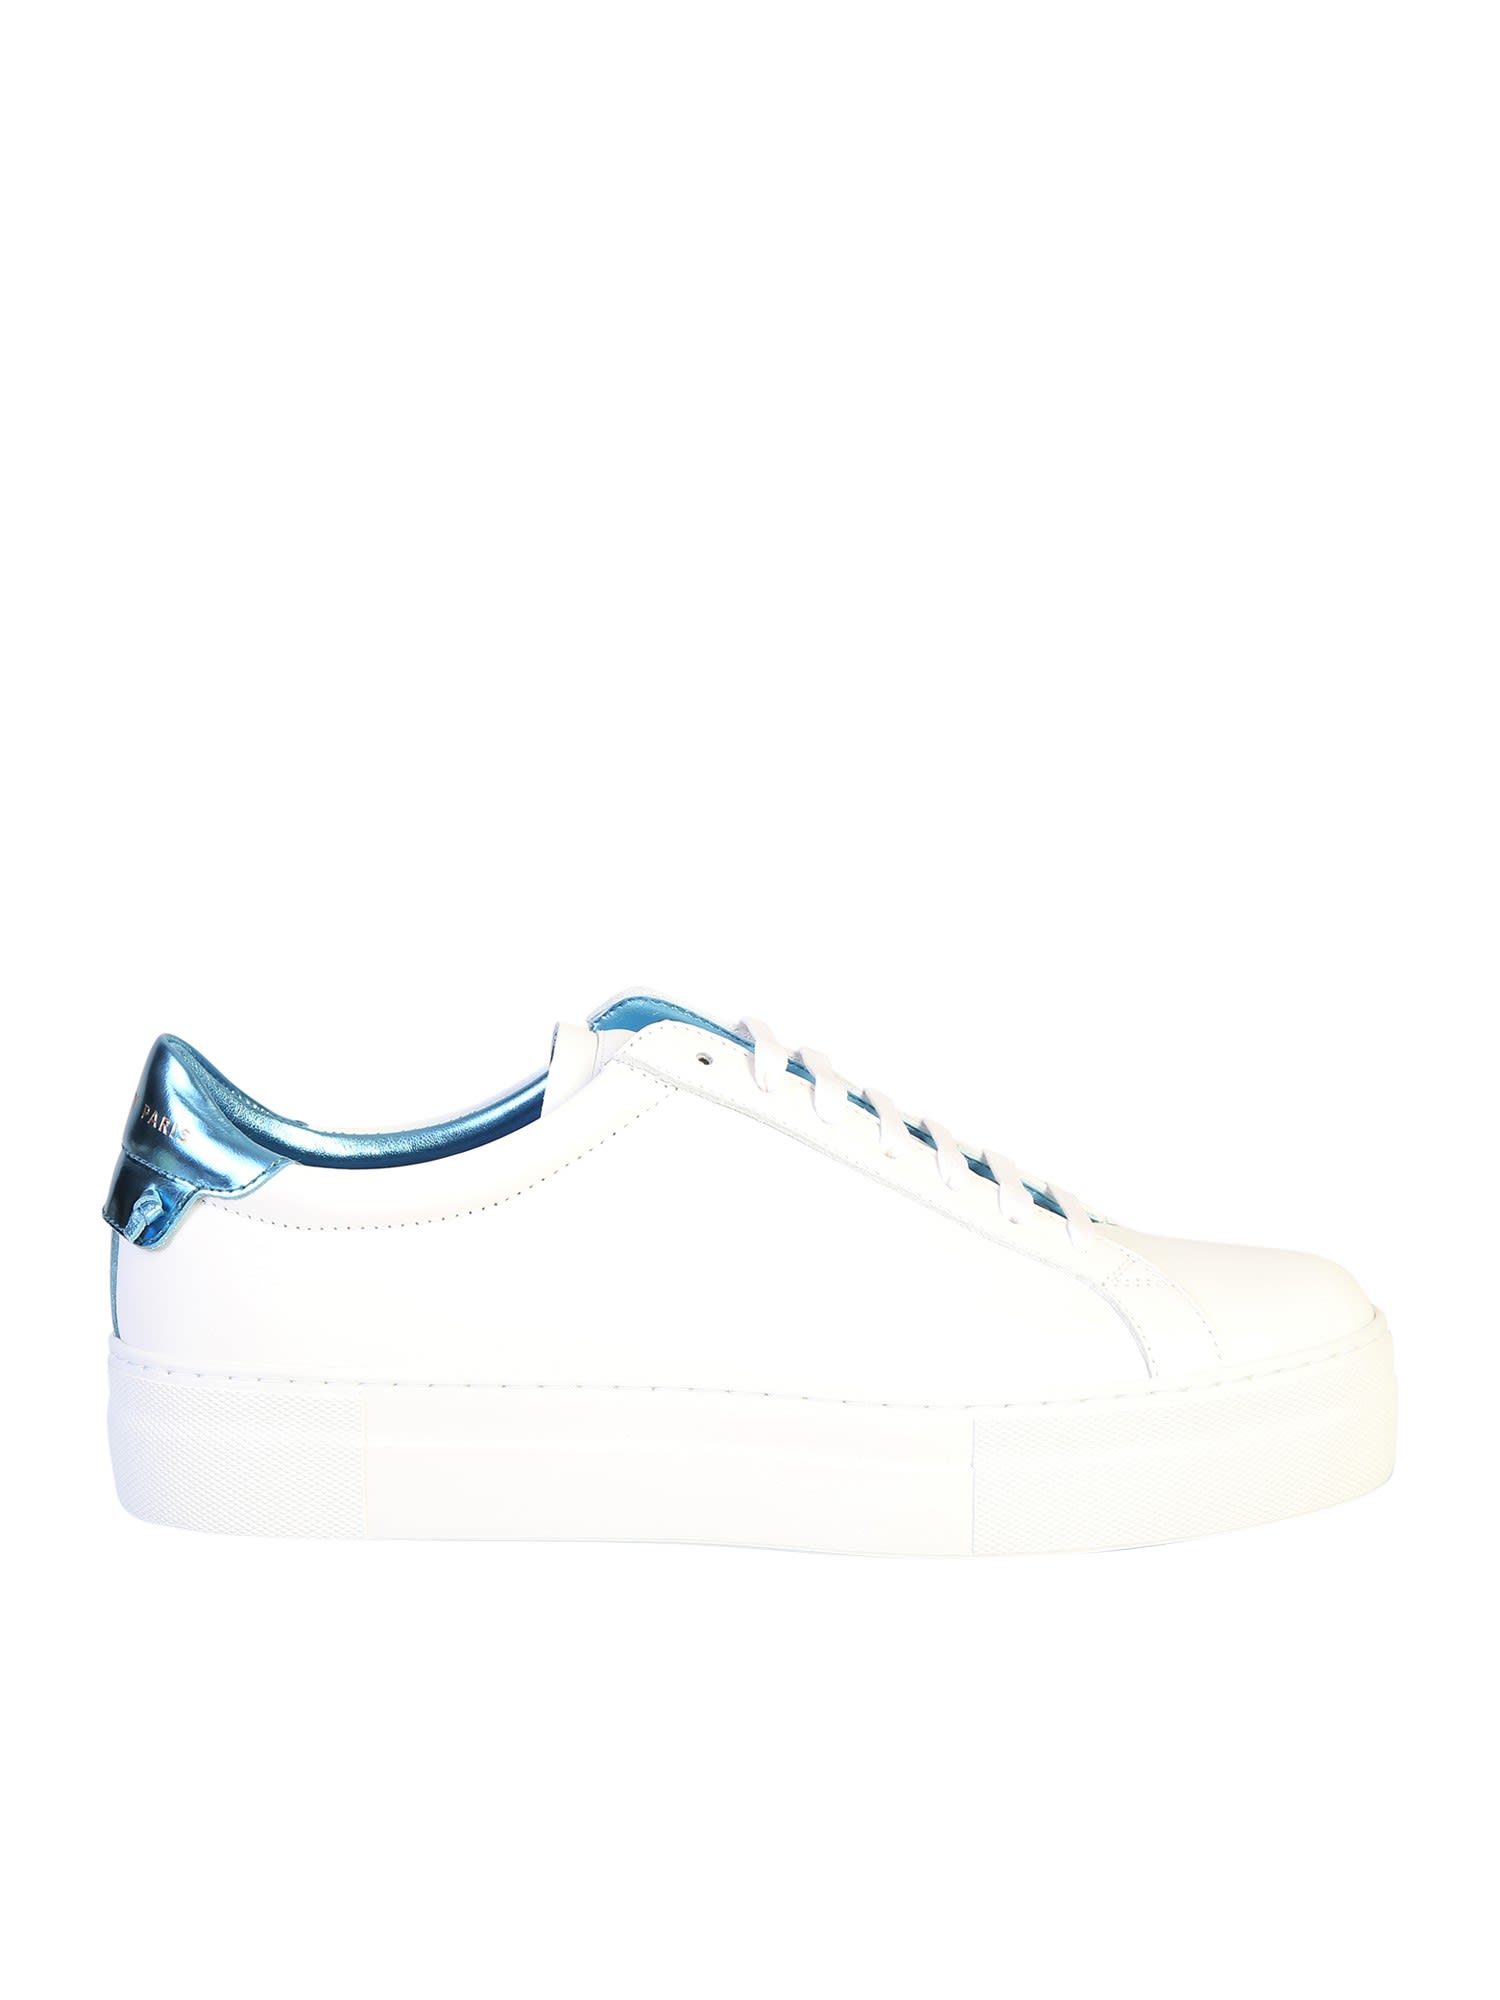 Buy Givenchy Branded Sneakers online, shop Givenchy shoes with free shipping